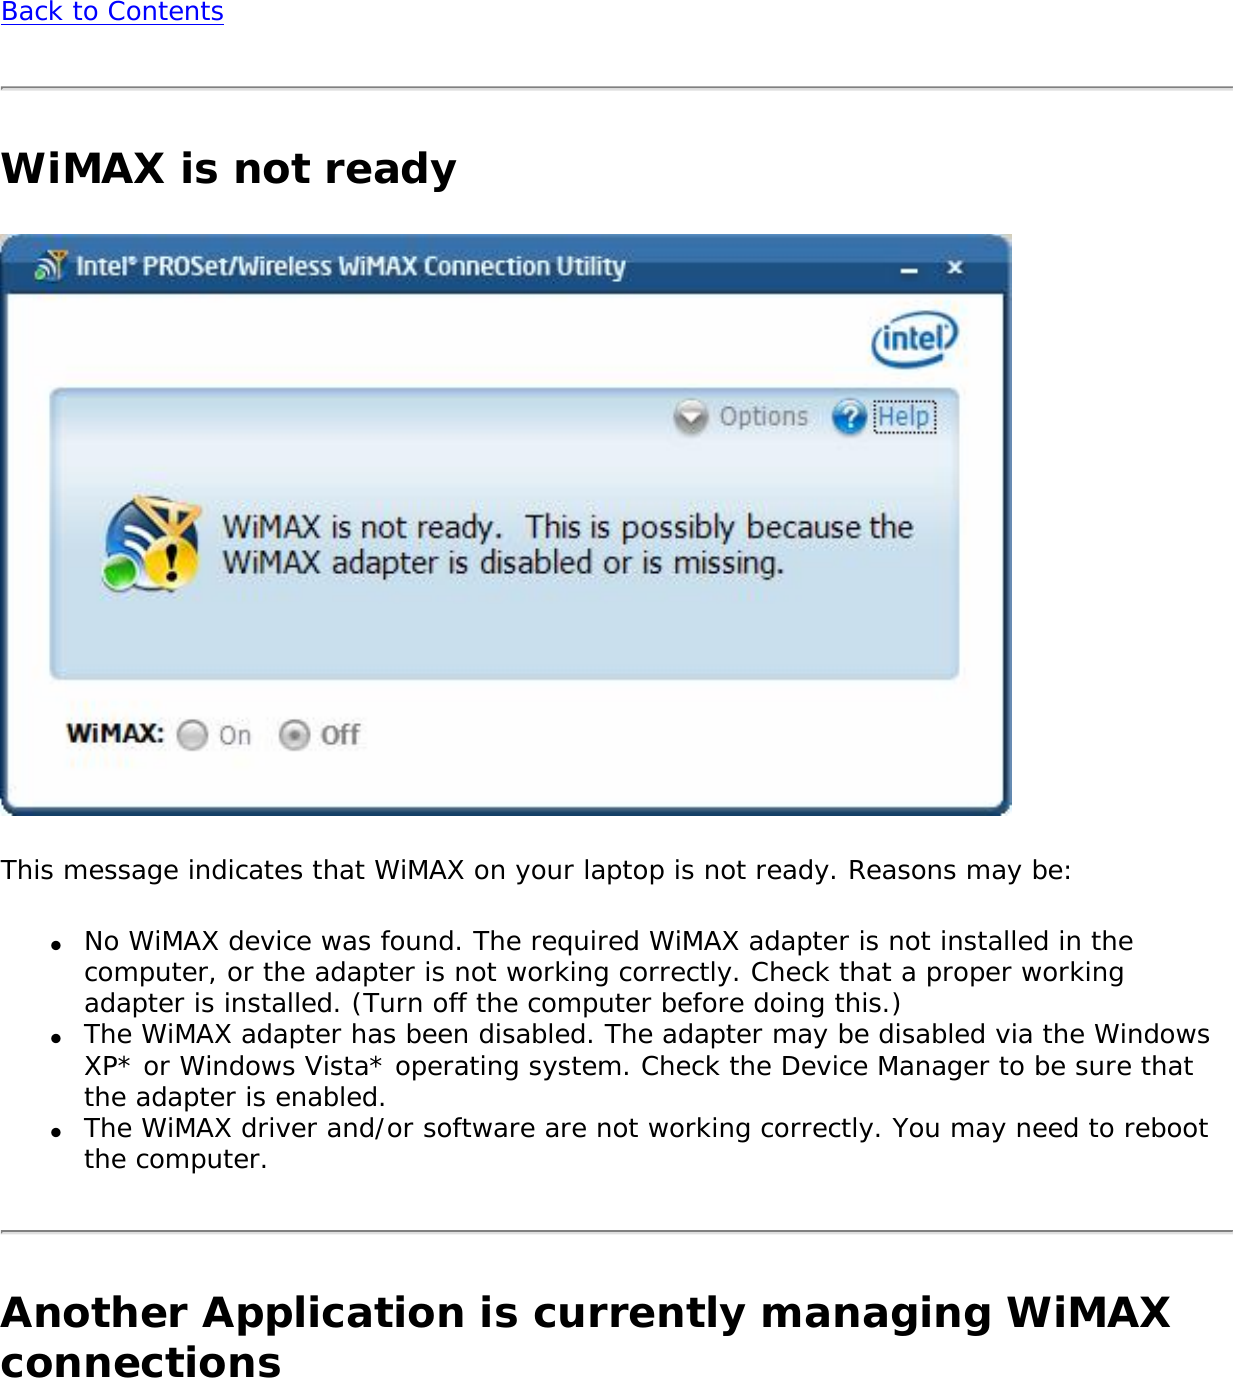 Back to ContentsWiMAX is not readyThis message indicates that WiMAX on your laptop is not ready. Reasons may be:●     No WiMAX device was found. The required WiMAX adapter is not installed in the computer, or the adapter is not working correctly. Check that a proper working adapter is installed. (Turn off the computer before doing this.) ●     The WiMAX adapter has been disabled. The adapter may be disabled via the Windows XP* or Windows Vista* operating system. Check the Device Manager to be sure that the adapter is enabled.●     The WiMAX driver and/or software are not working correctly. You may need to reboot the computer.Another Application is currently managing WiMAX connections 